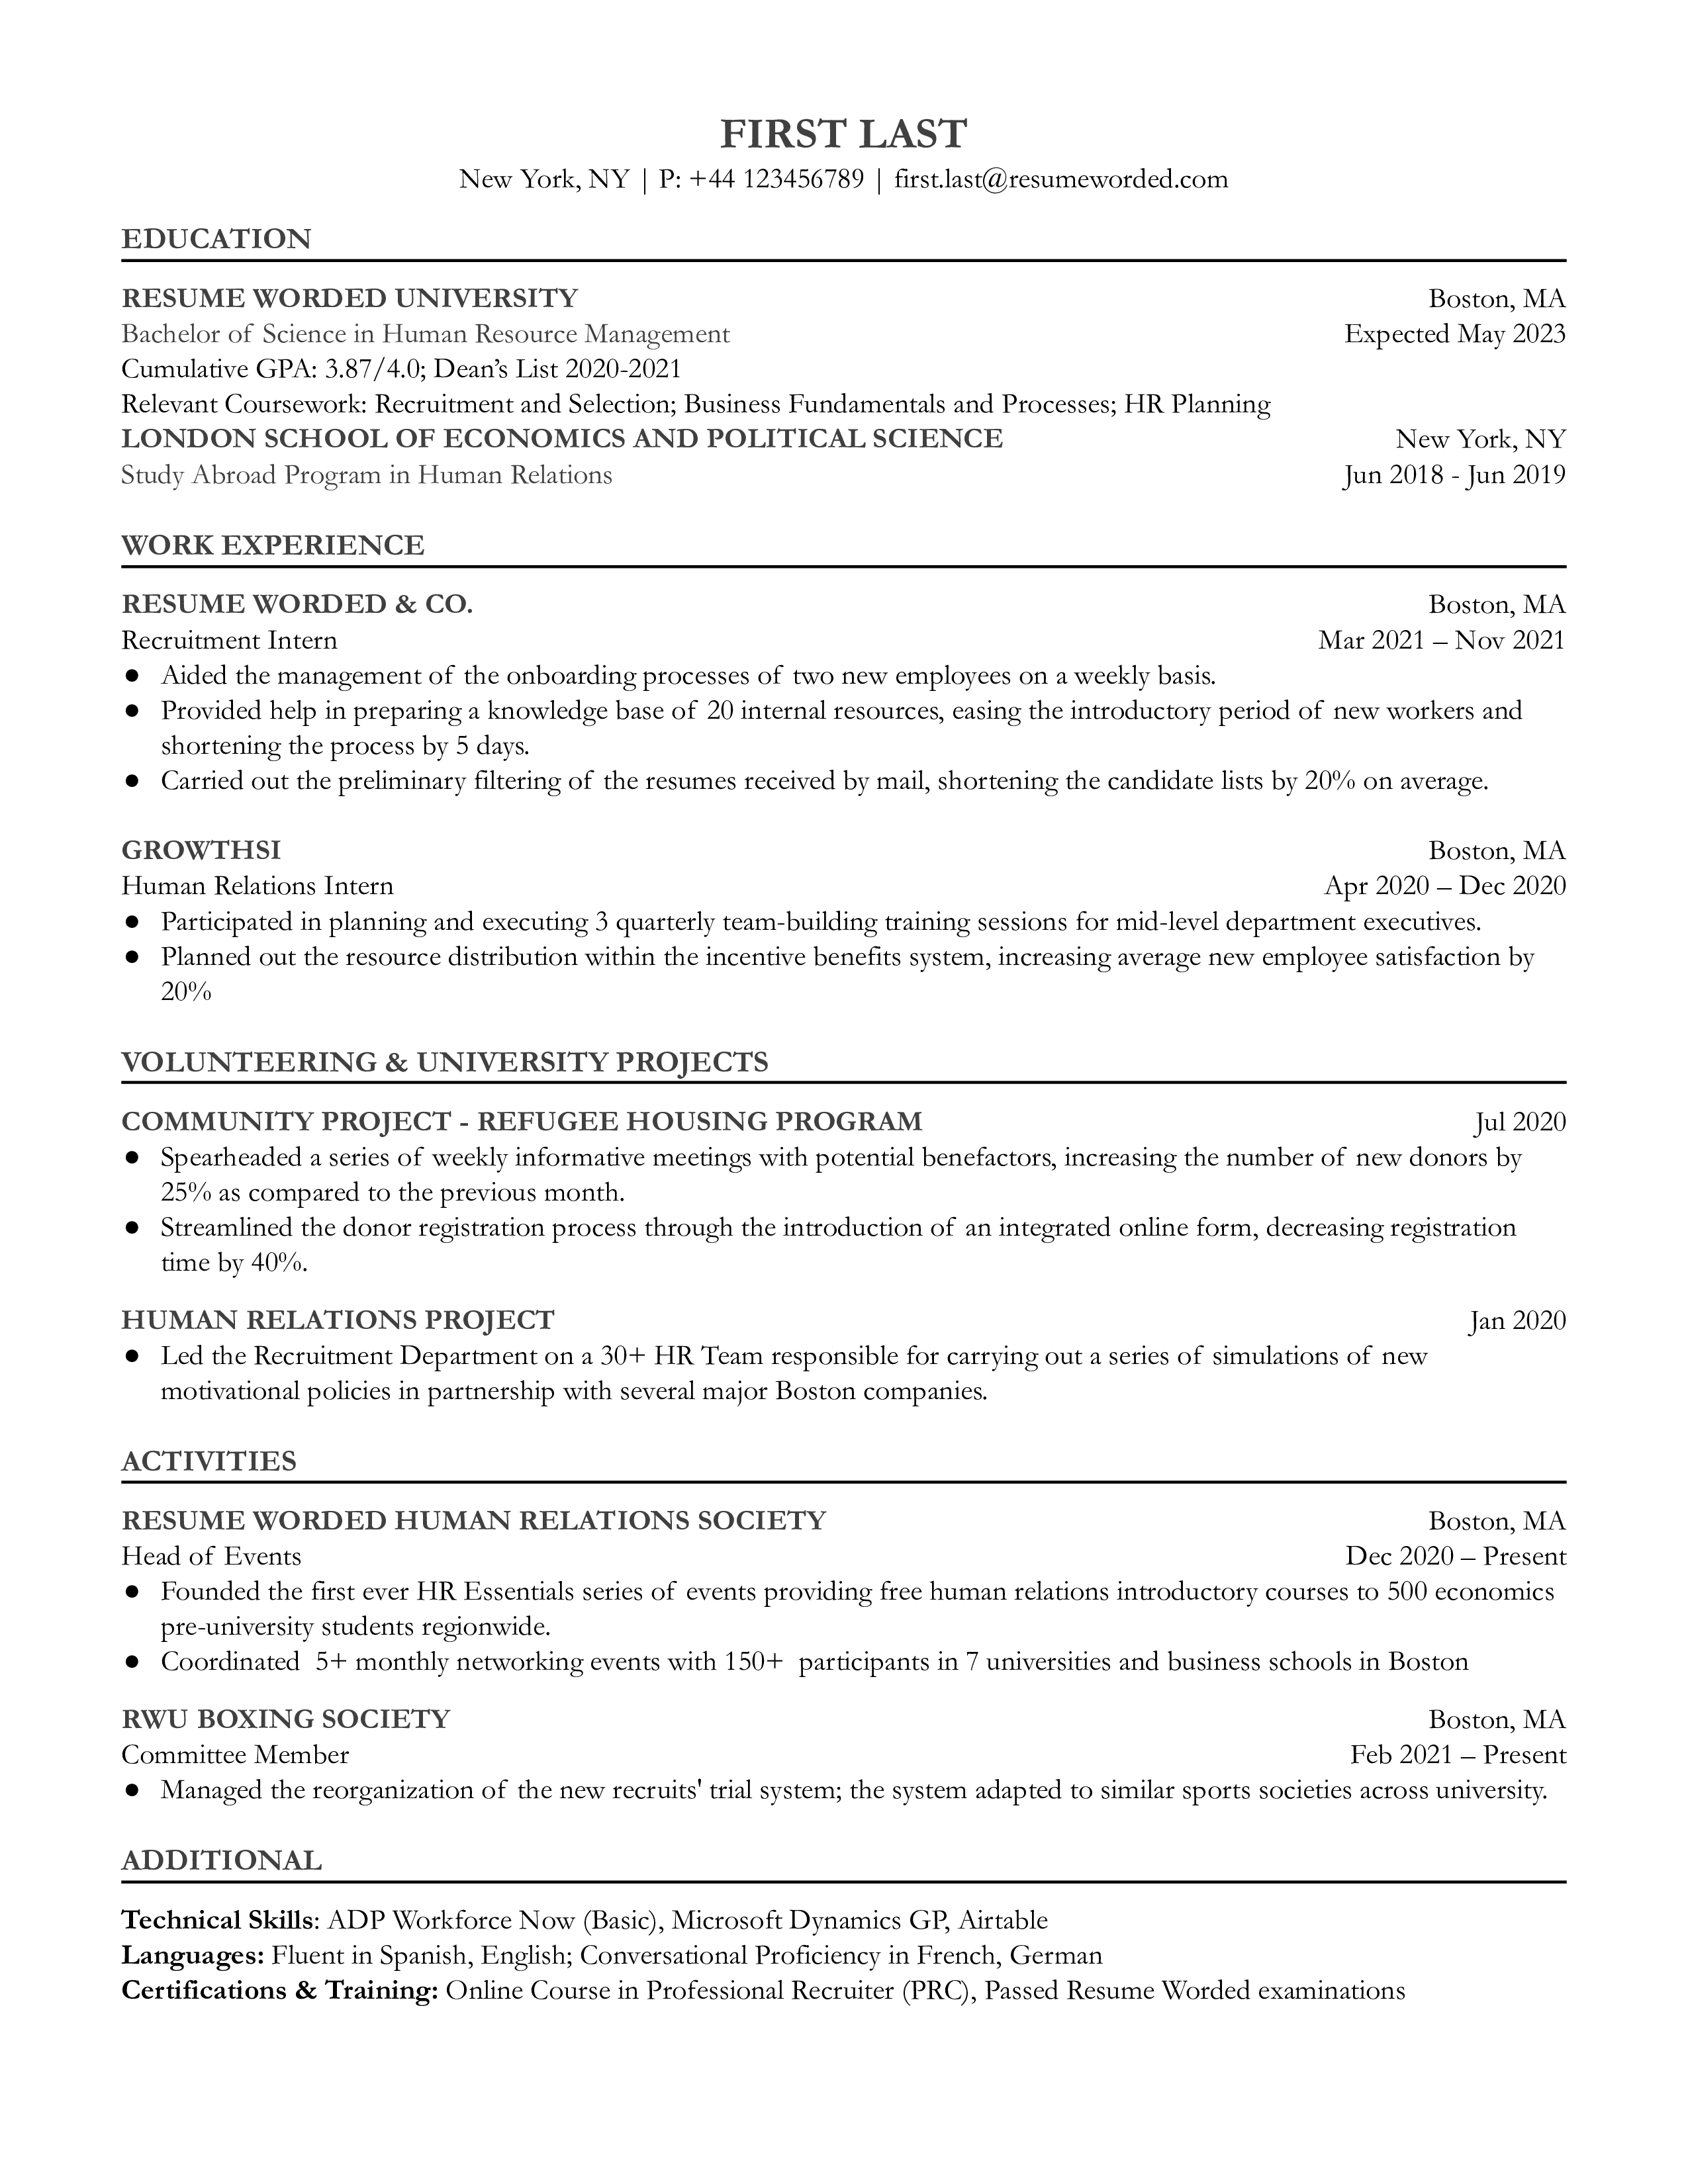 Entry-level recruiter resume sample that highlights their skills section and related experience.